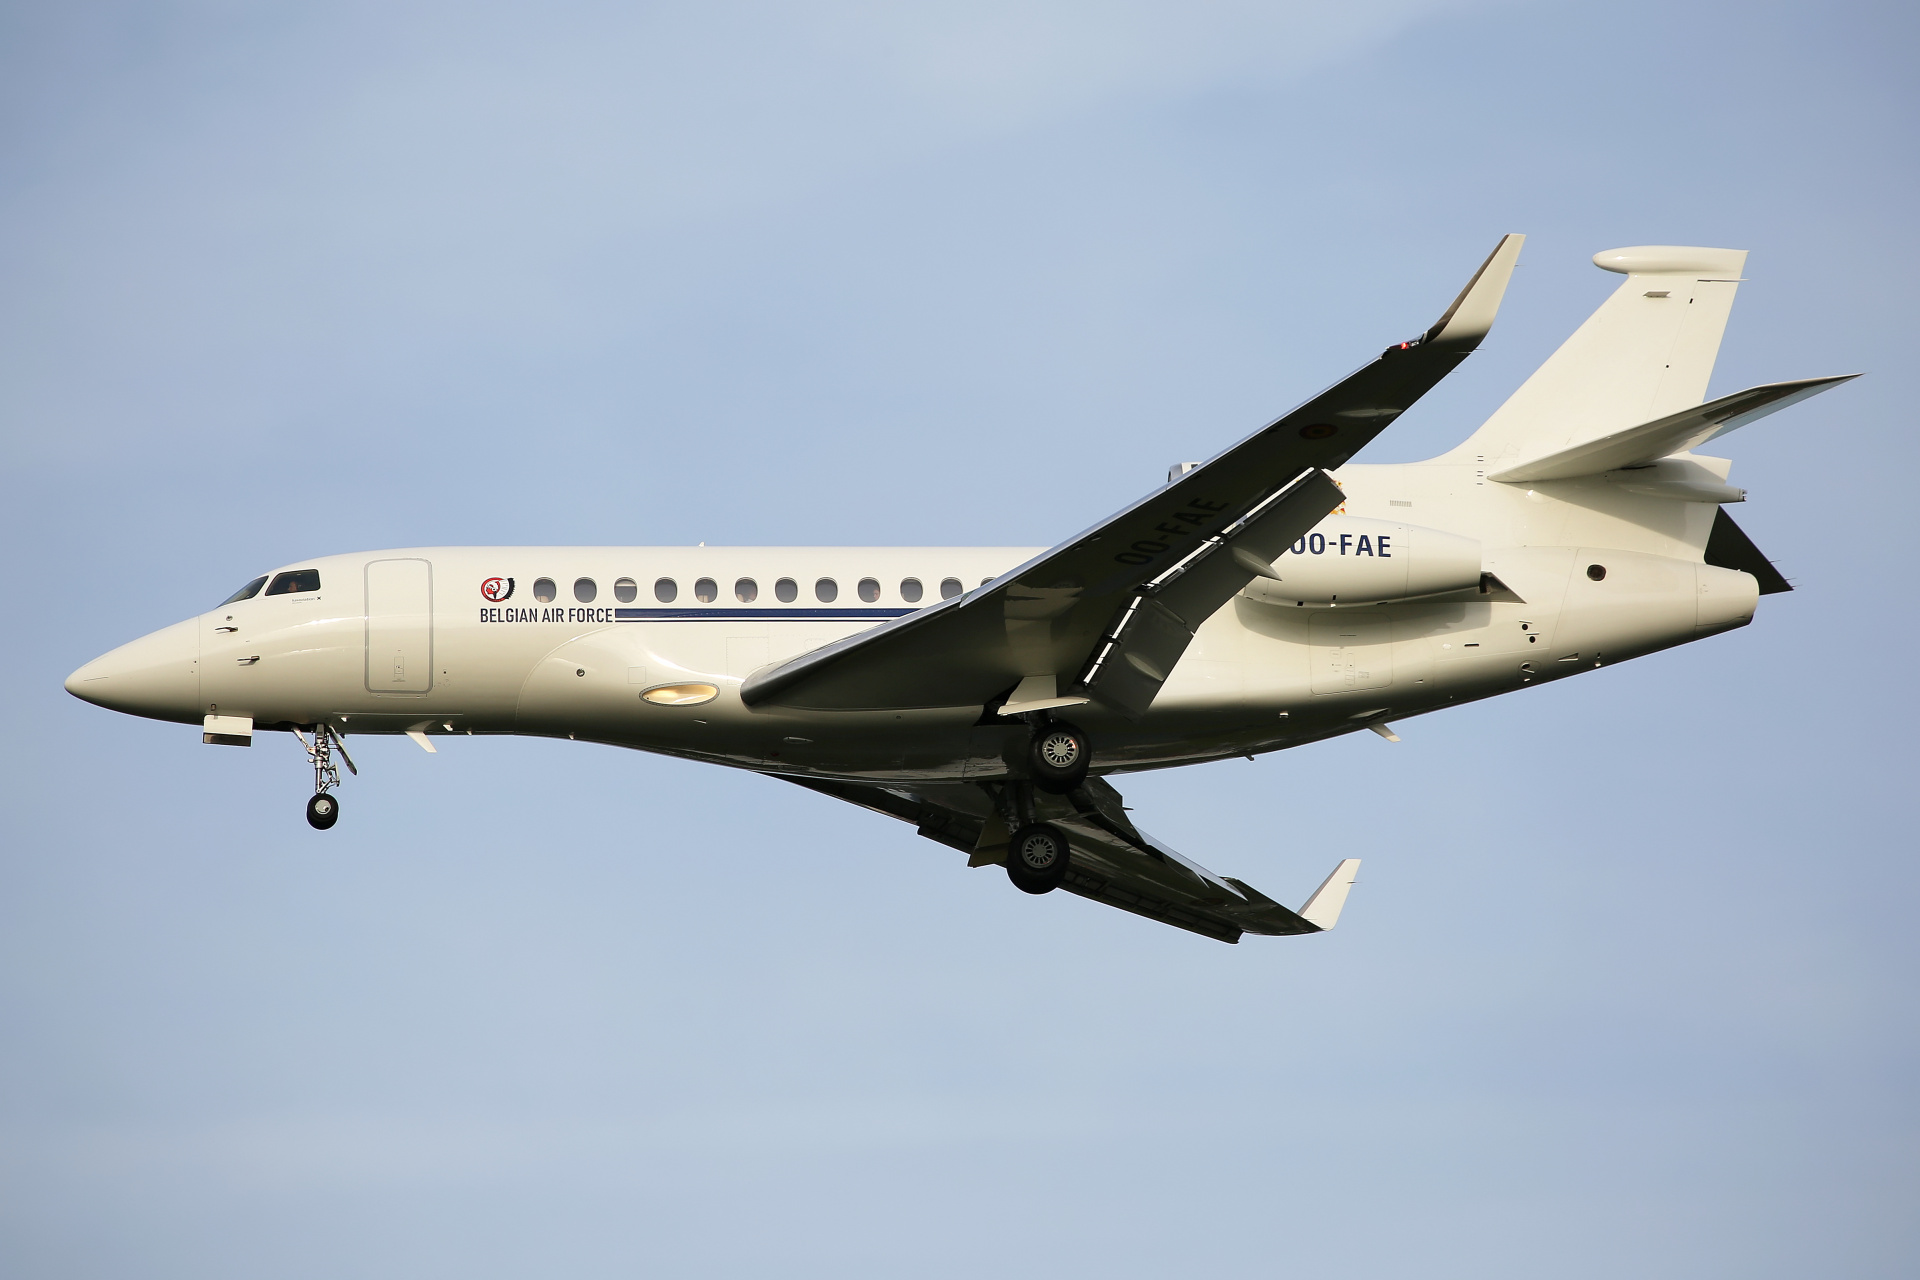 OO-FAE, Belgian Air Force (Luxaviation) (Aircraft » Schiphol Spotting » Dassault Falcon 7X)